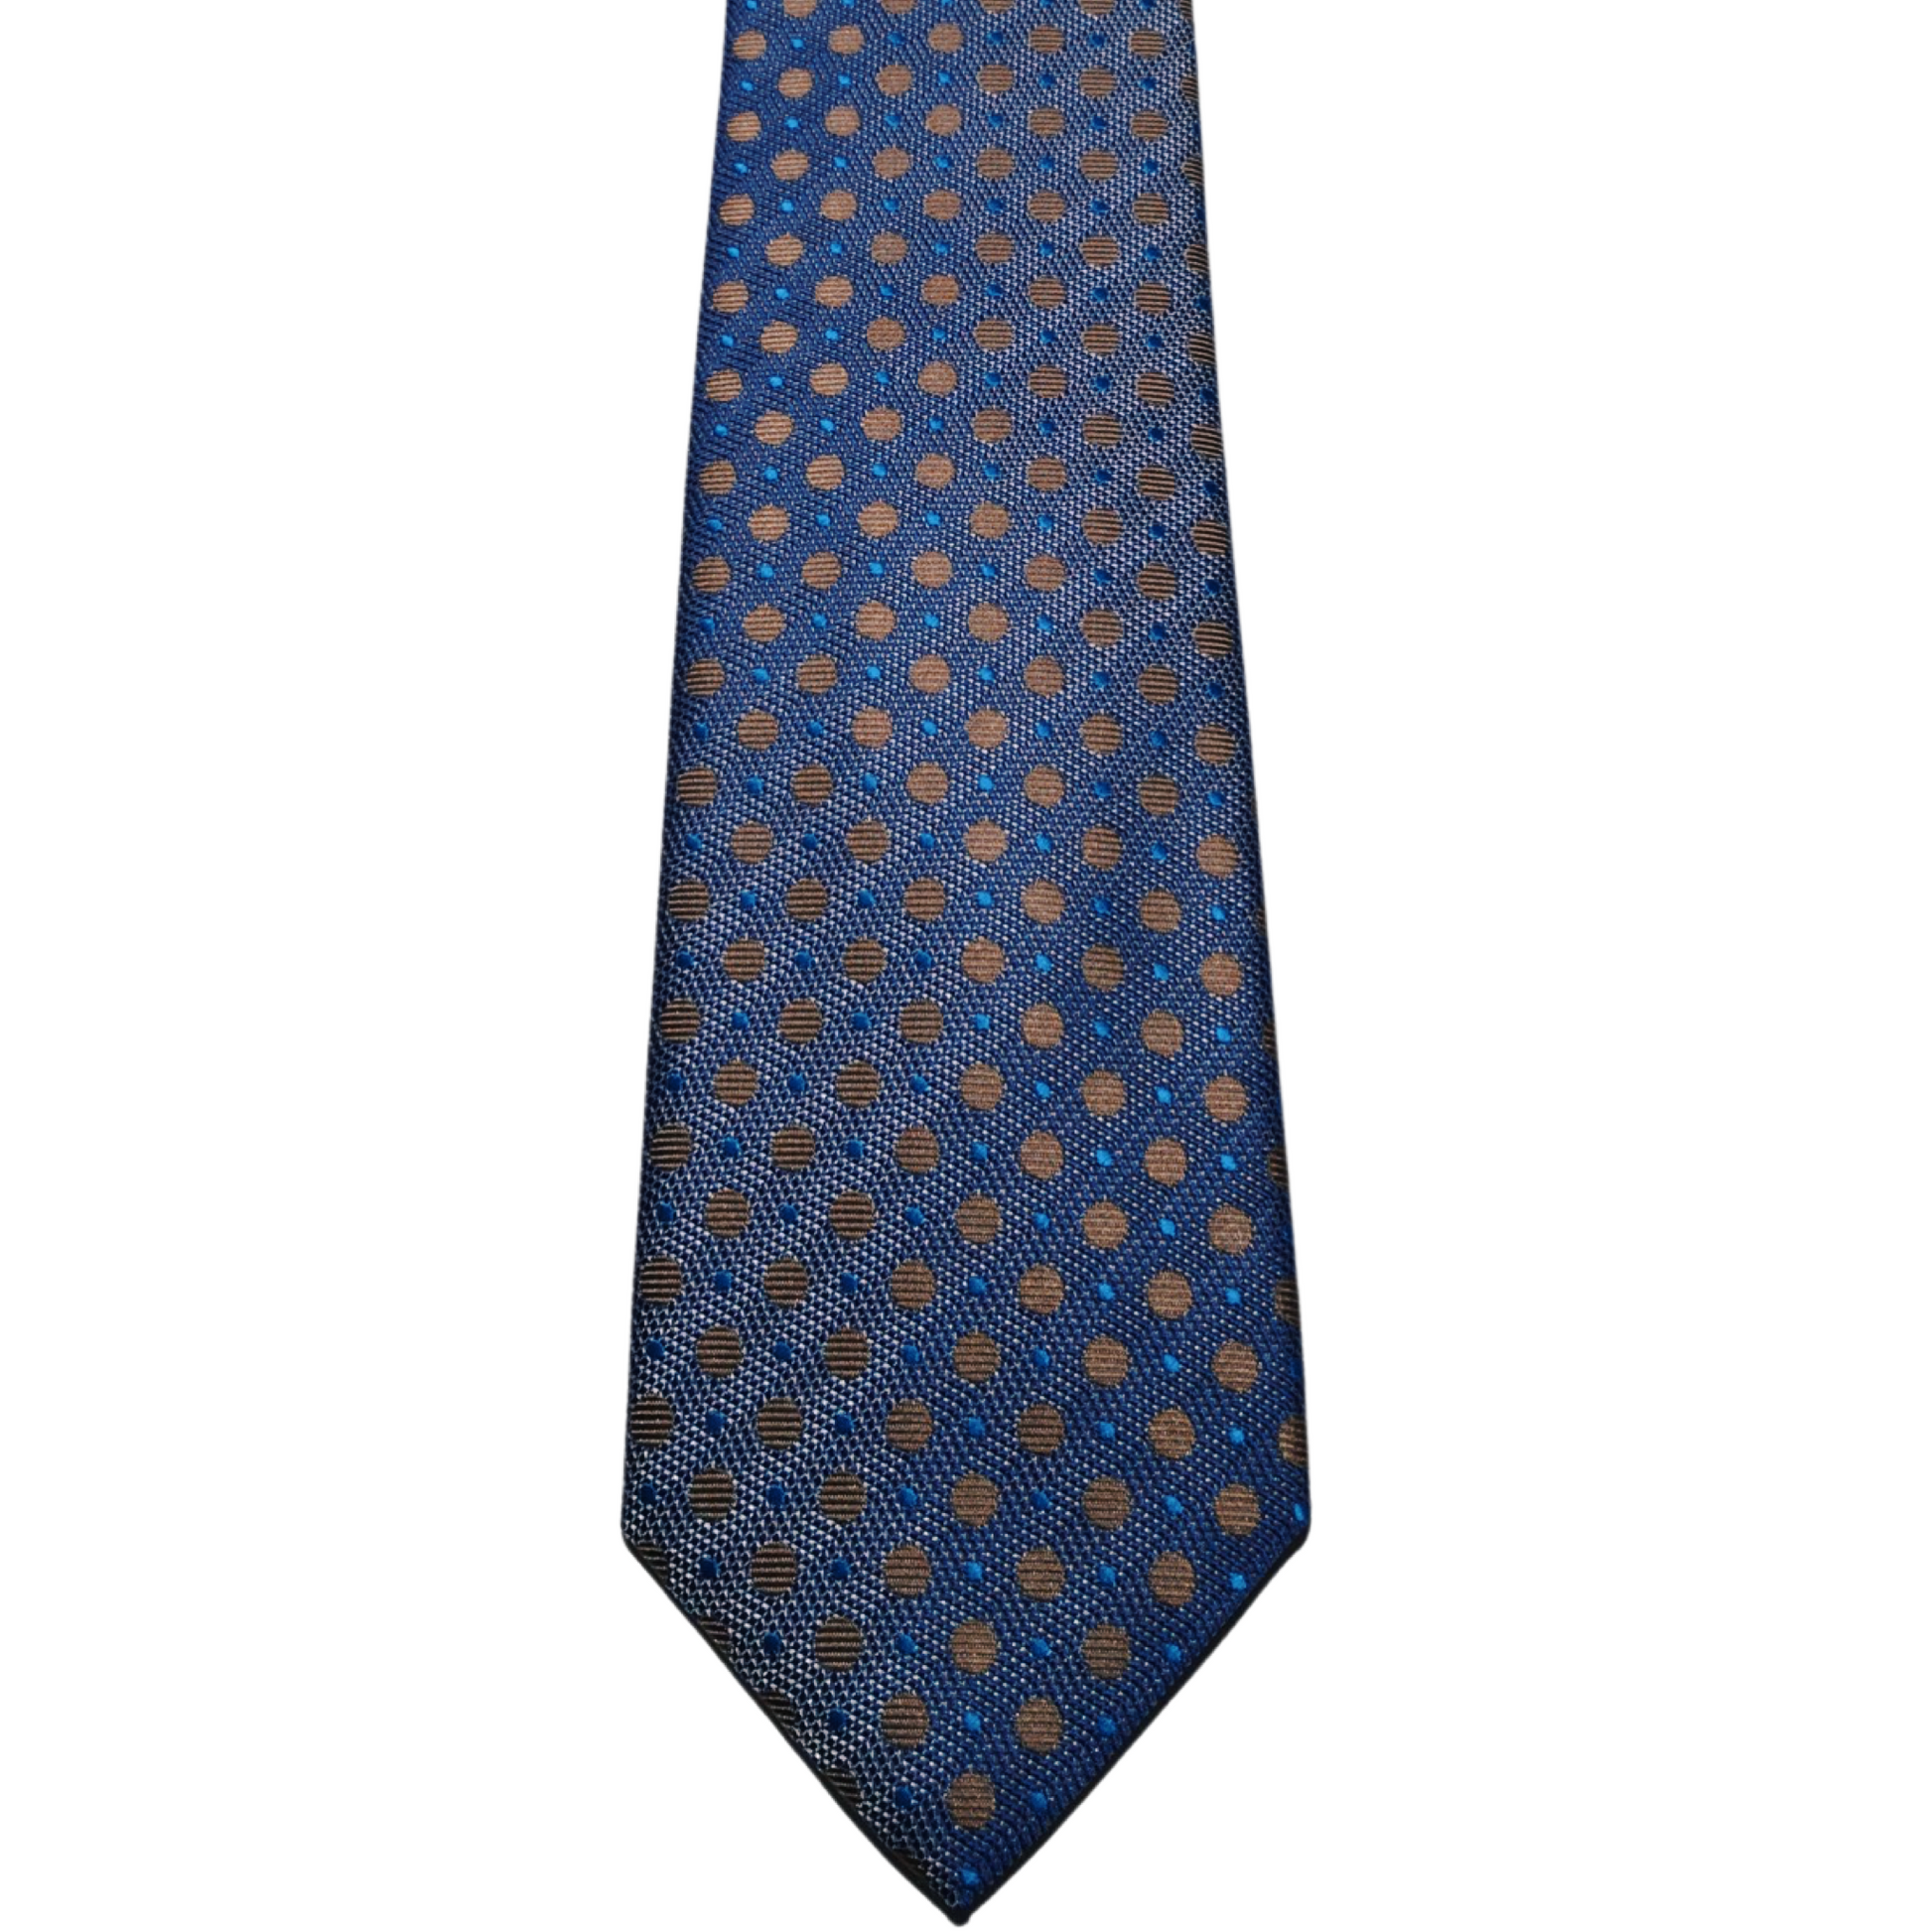 This Gian Marco Venturi microfibre light blue tie has a beige polka dot pattern, making it a nice pairing with a crisp white or blue Scoop dress shirt, a navy blue suit and brown shoes.